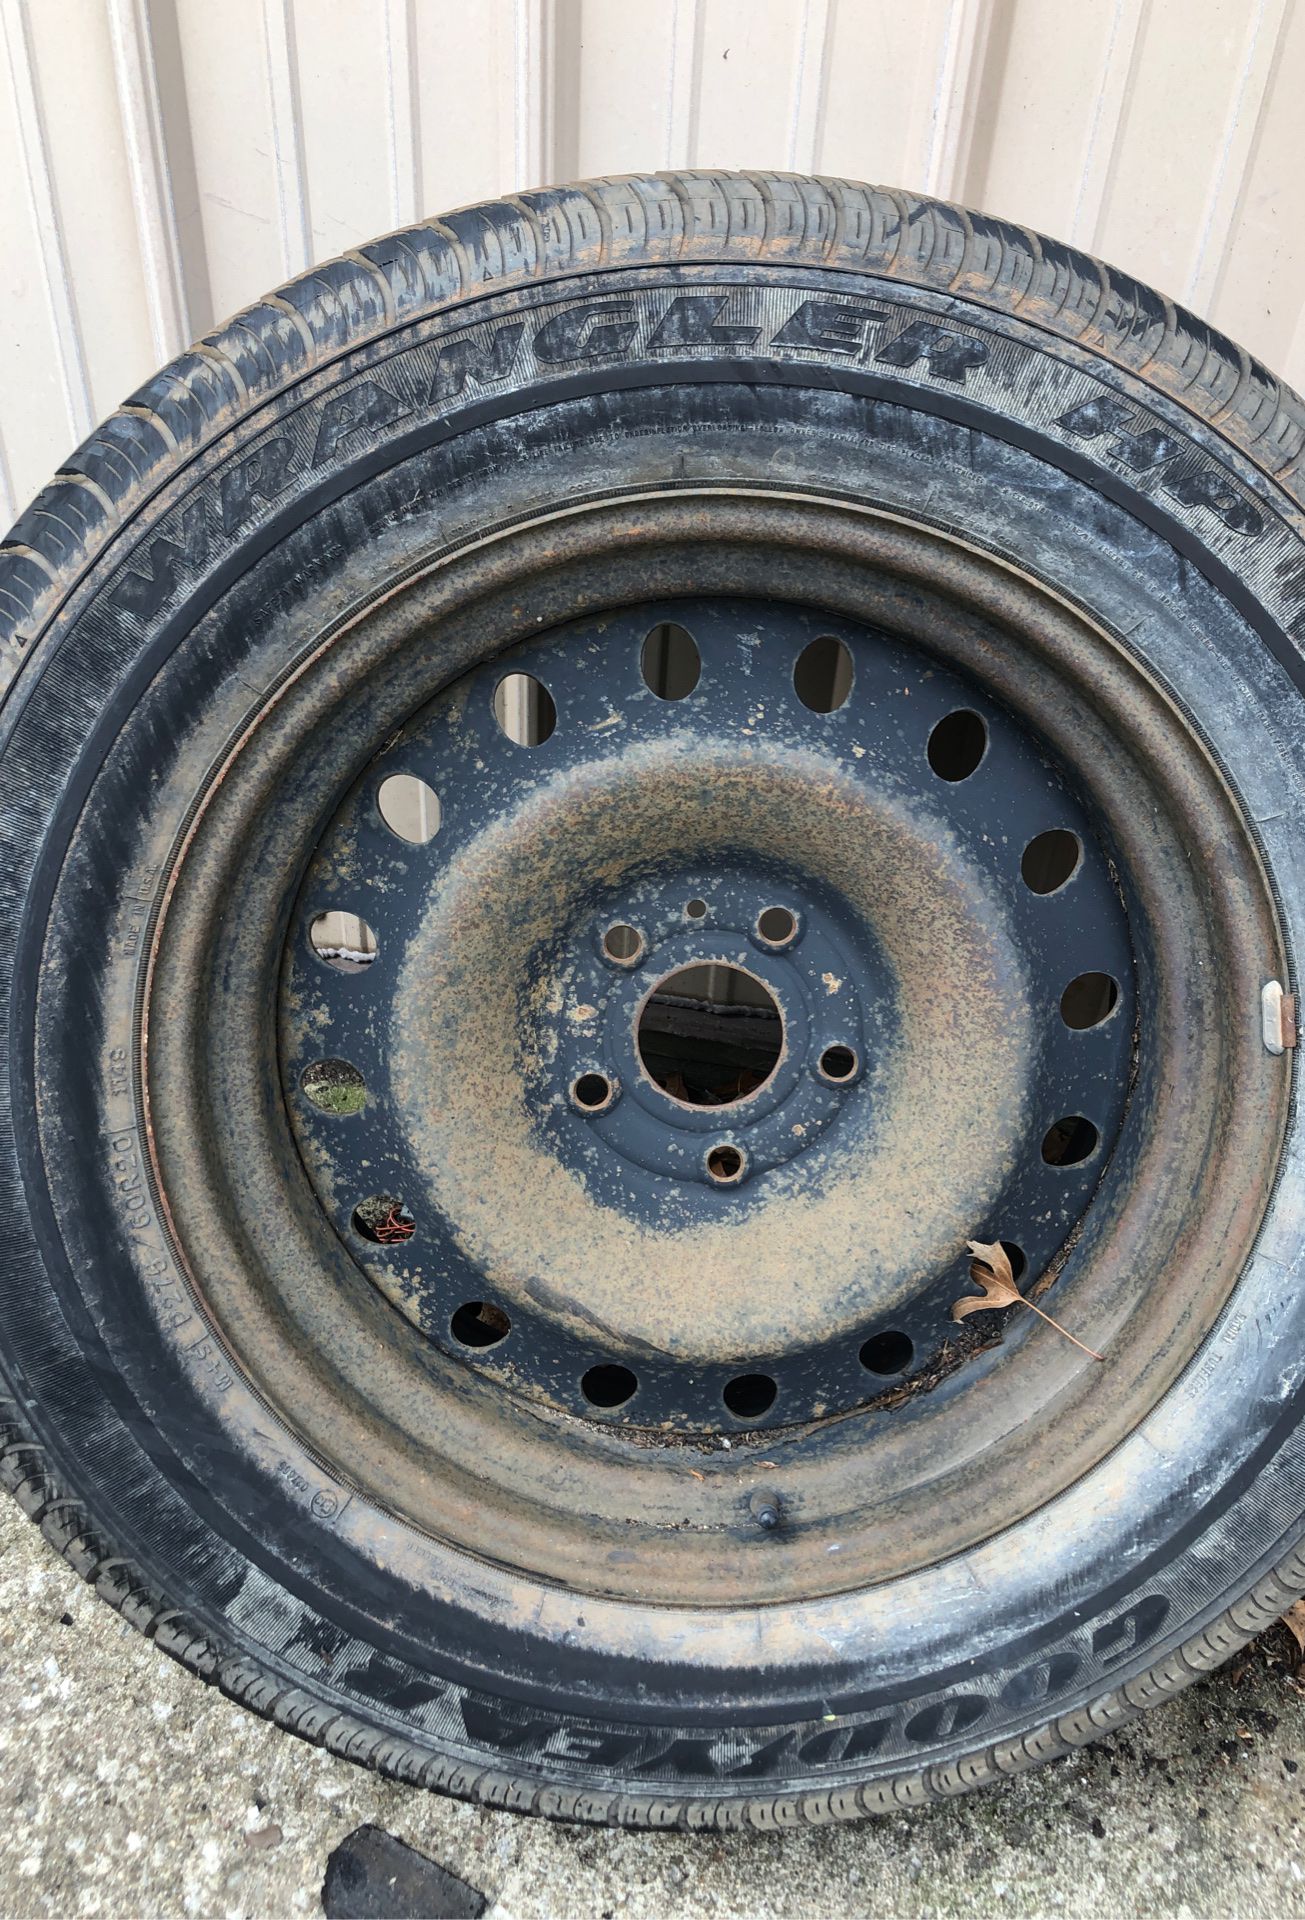 Trailer spare tire two 7560 R 20 excellent condition good thread